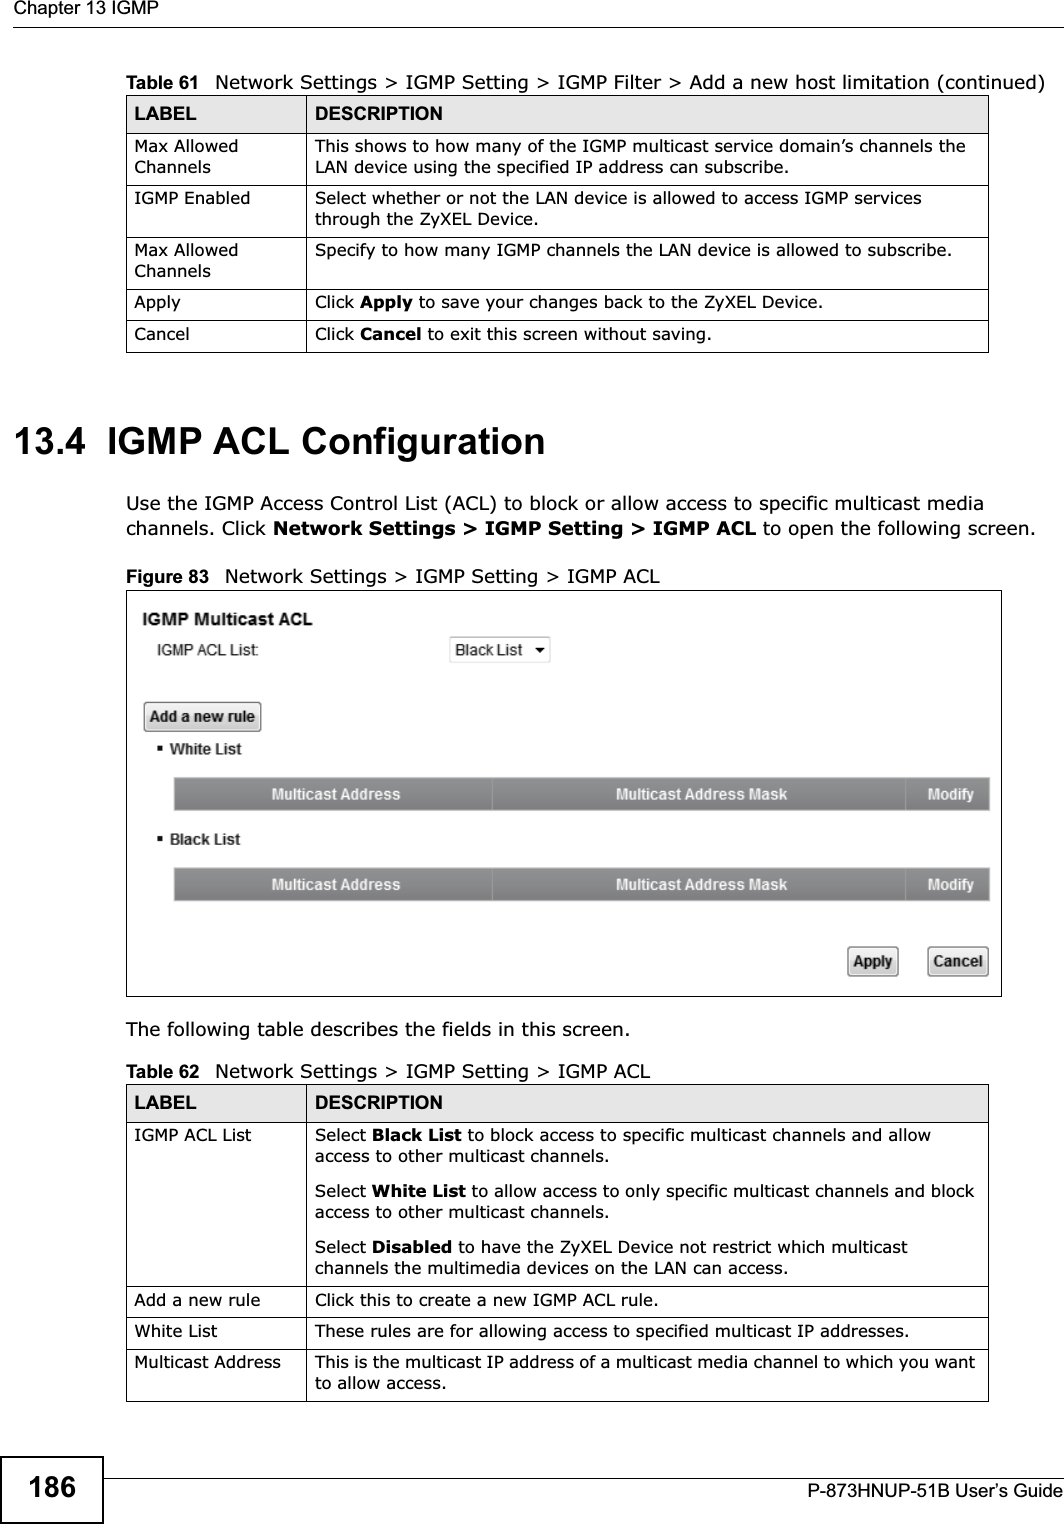 Chapter 13 IGMPP-873HNUP-51B User’s Guide18613.4  IGMP ACL ConfigurationUse the IGMP Access Control List (ACL) to block or allow access to specific multicast media channels. Click Network Settings &gt; IGMP Setting &gt; IGMP ACL to open the following screen. Figure 83   Network Settings &gt; IGMP Setting &gt; IGMP ACL The following table describes the fields in this screen.Max Allowed ChannelsThis shows to how many of the IGMP multicast service domain’s channels the LAN device using the specified IP address can subscribe.IGMP Enabled Select whether or not the LAN device is allowed to access IGMP services through the ZyXEL Device.Max Allowed ChannelsSpecify to how many IGMP channels the LAN device is allowed to subscribe.Apply Click Apply to save your changes back to the ZyXEL Device.Cancel Click Cancel to exit this screen without saving.Table 61   Network Settings &gt; IGMP Setting &gt; IGMP Filter &gt; Add a new host limitation (continued)LABEL DESCRIPTIONTable 62   Network Settings &gt; IGMP Setting &gt; IGMP ACL LABEL DESCRIPTIONIGMP ACL List Select Black List to block access to specific multicast channels and allow access to other multicast channels.Select White List to allow access to only specific multicast channels and block access to other multicast channels.Select Disabled to have the ZyXEL Device not restrict which multicast channels the multimedia devices on the LAN can access. Add a new rule Click this to create a new IGMP ACL rule.White List These rules are for allowing access to specified multicast IP addresses.Multicast Address This is the multicast IP address of a multicast media channel to which you want to allow access.